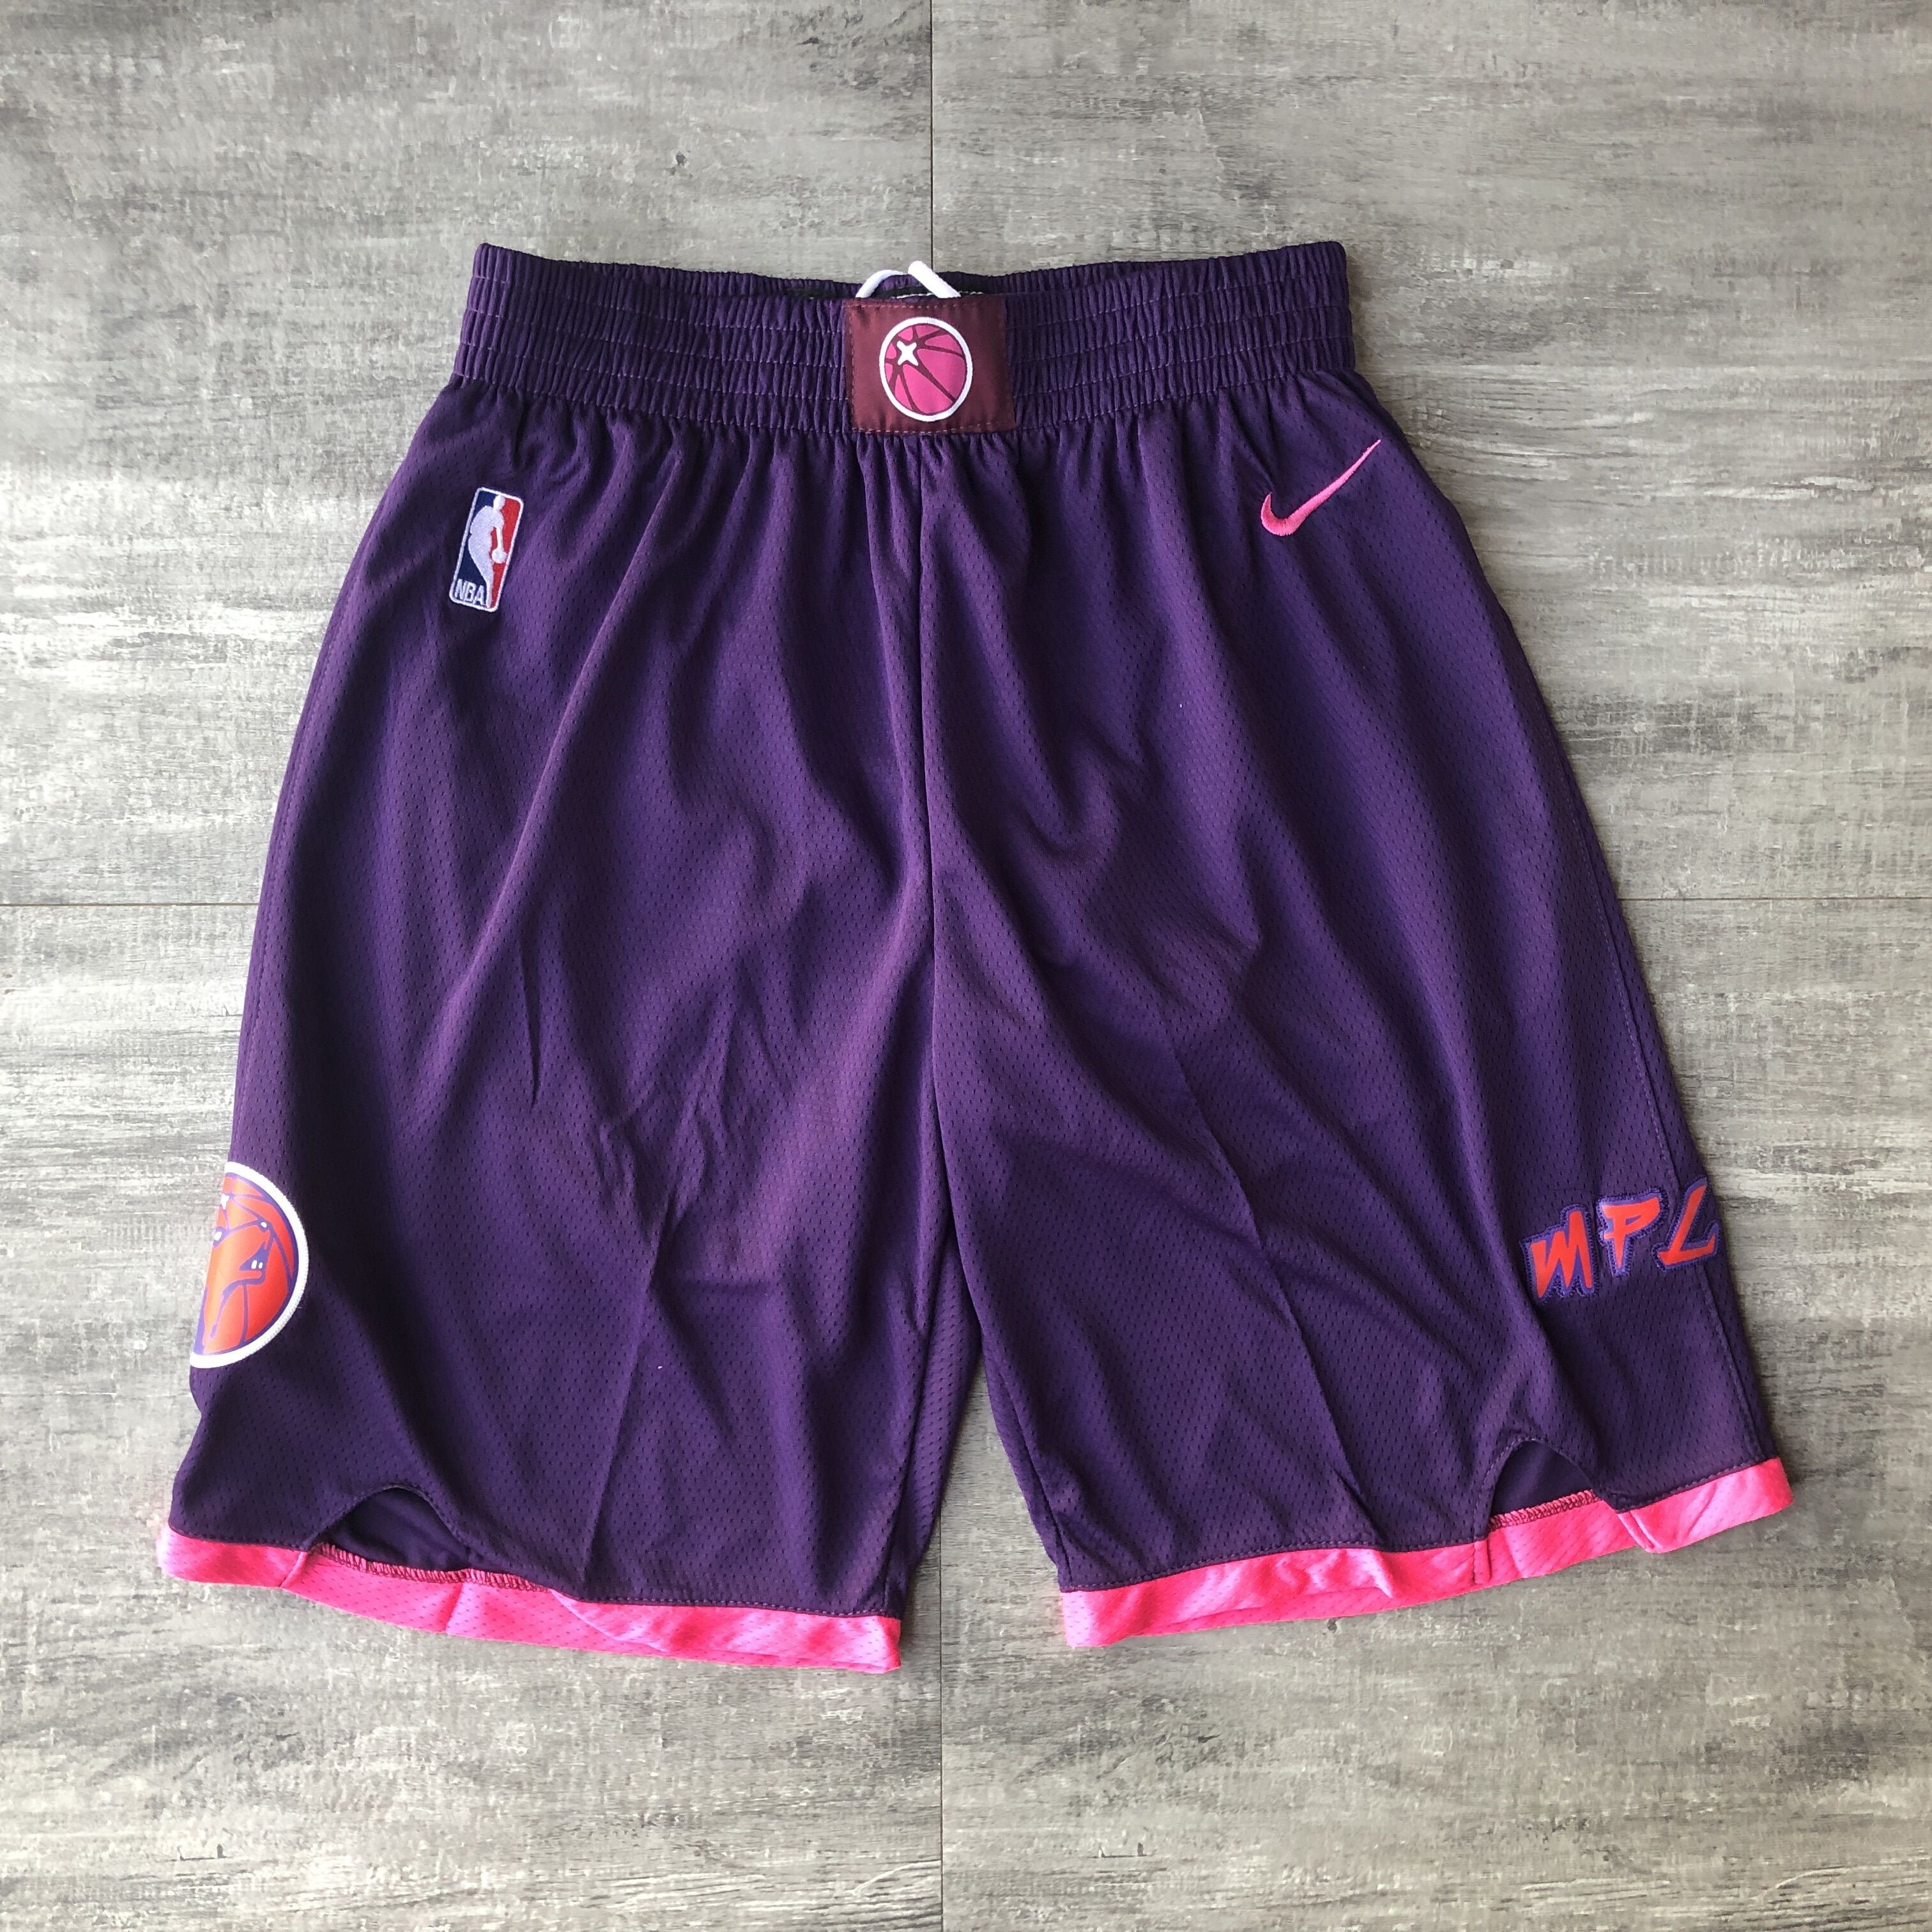 Wolves purple/pink shorts